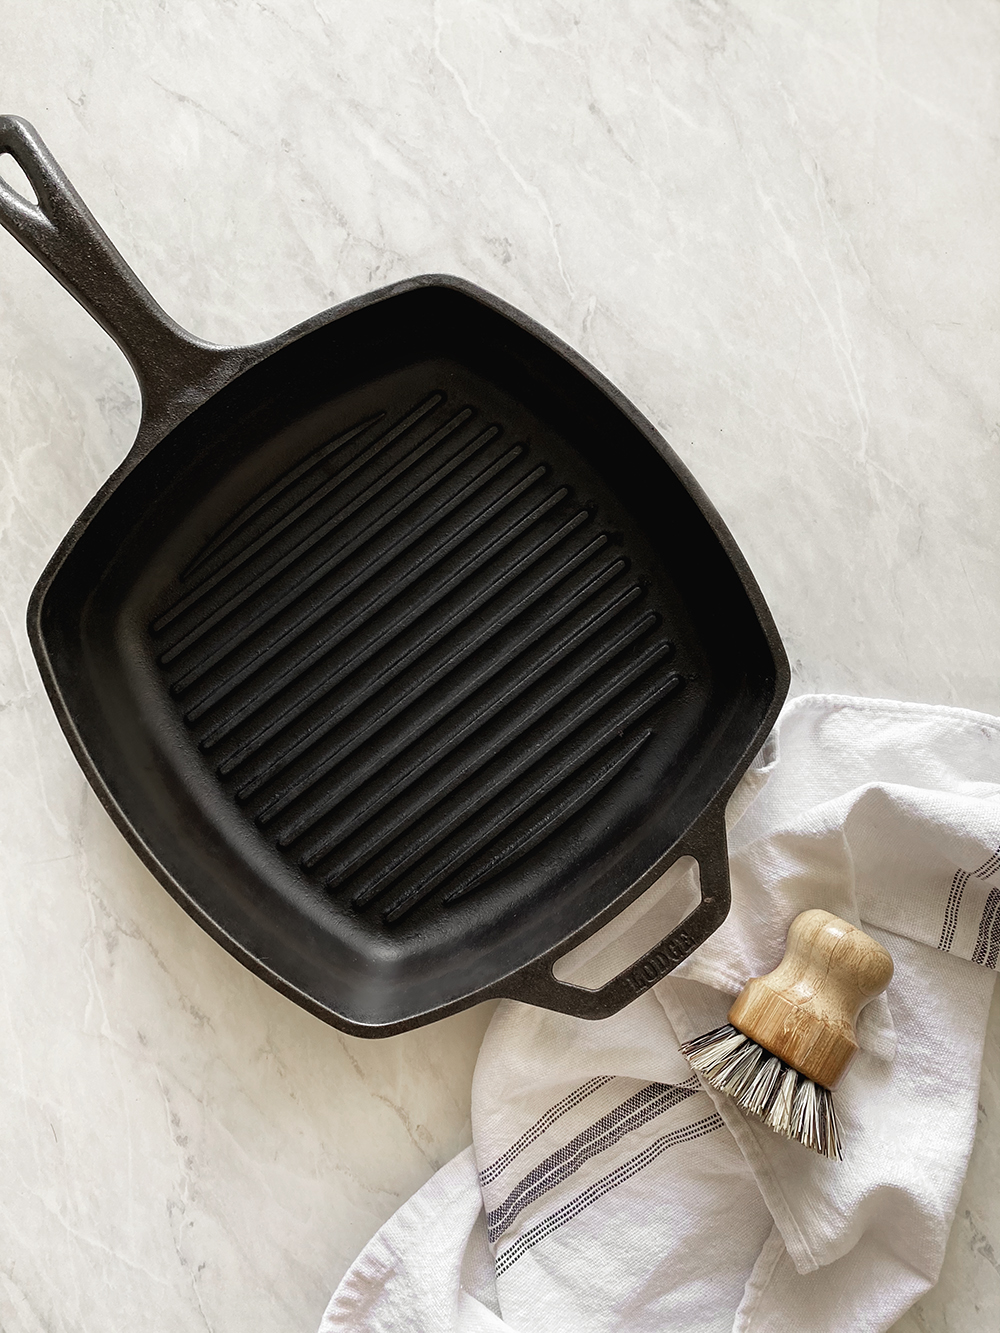 I'm sharing 8 reasons why we made the switch to cast iron cookware and love it. This was another baby step we made in the efforts to reduce our toxin load and creating a safer home. Learn more and shop my favorite cast iron cookware finds over on KaraLayne.com!